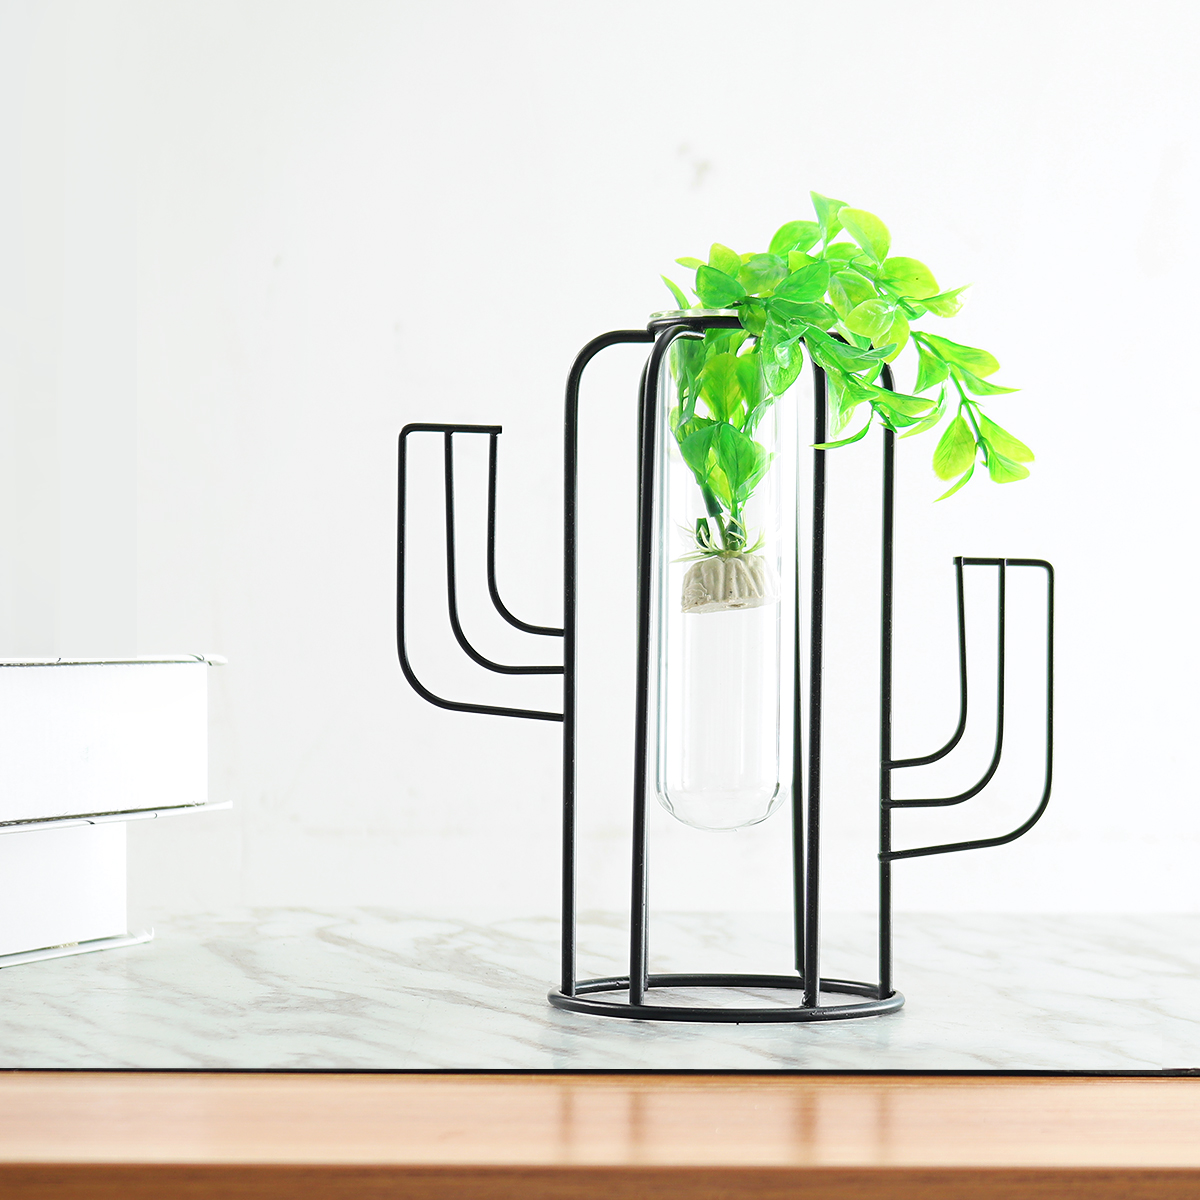 Creative-Hanging-Test-Tube-Glass-Vase-Hydroponic-Flower-Container--Base-Holder-1530229-4